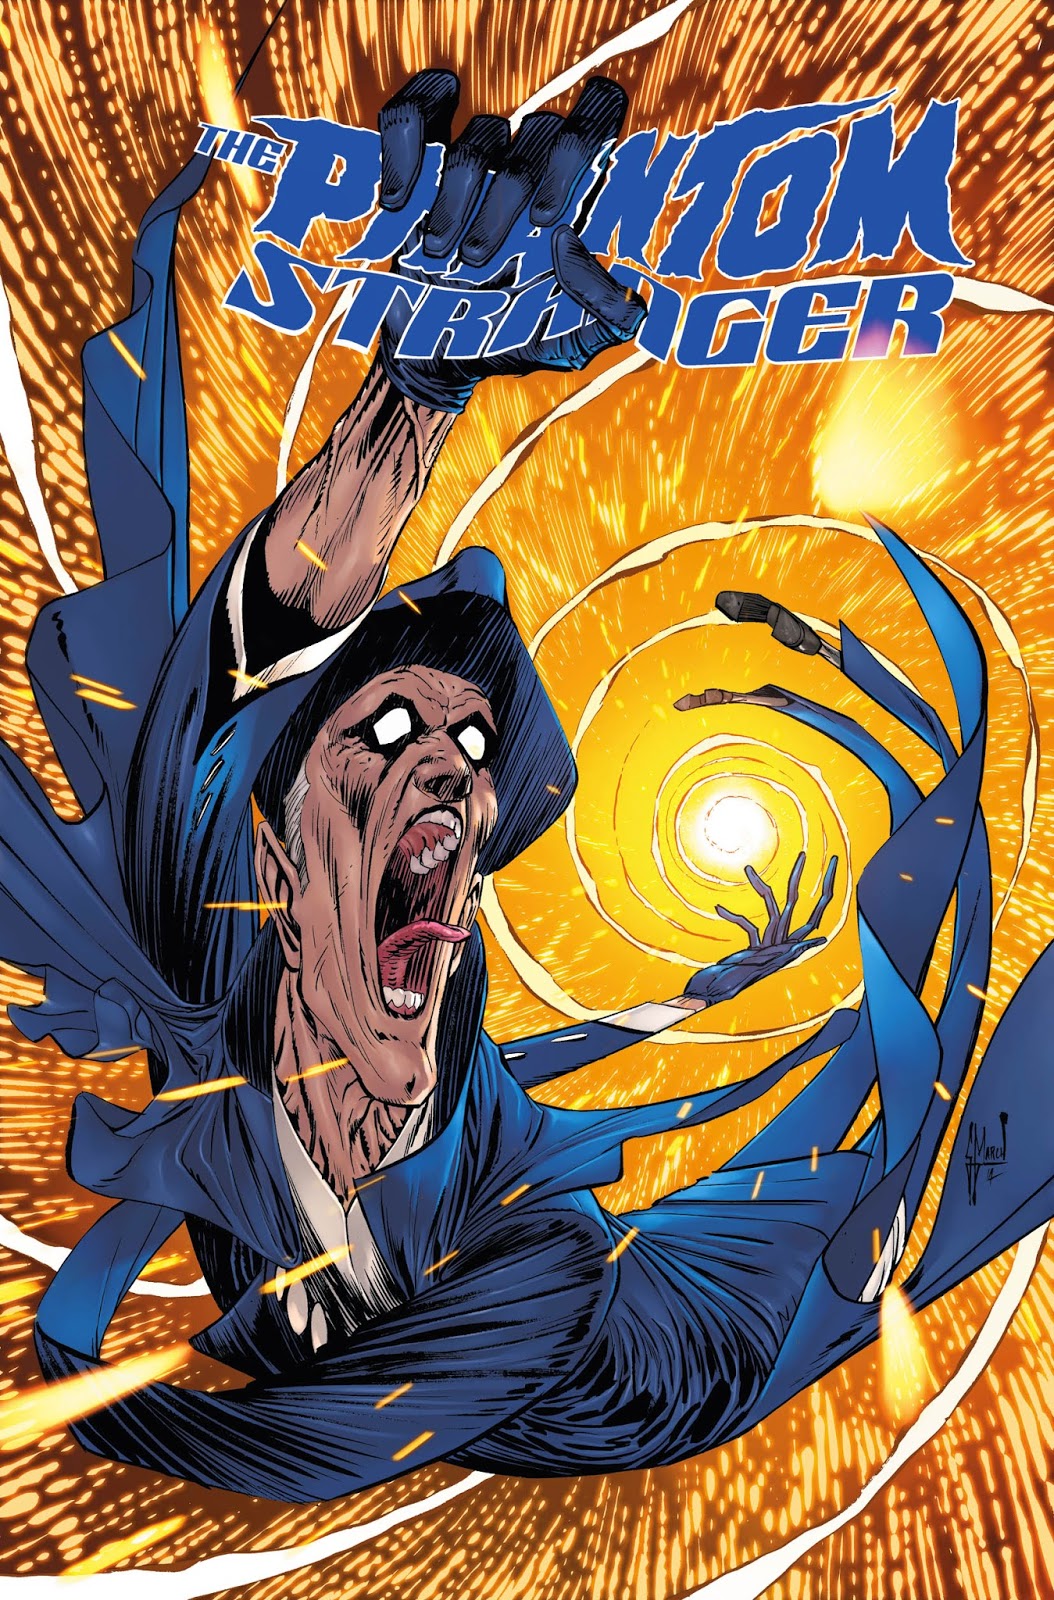 Making of a cover: PHANTOM STRANGER #19 by Guillem March